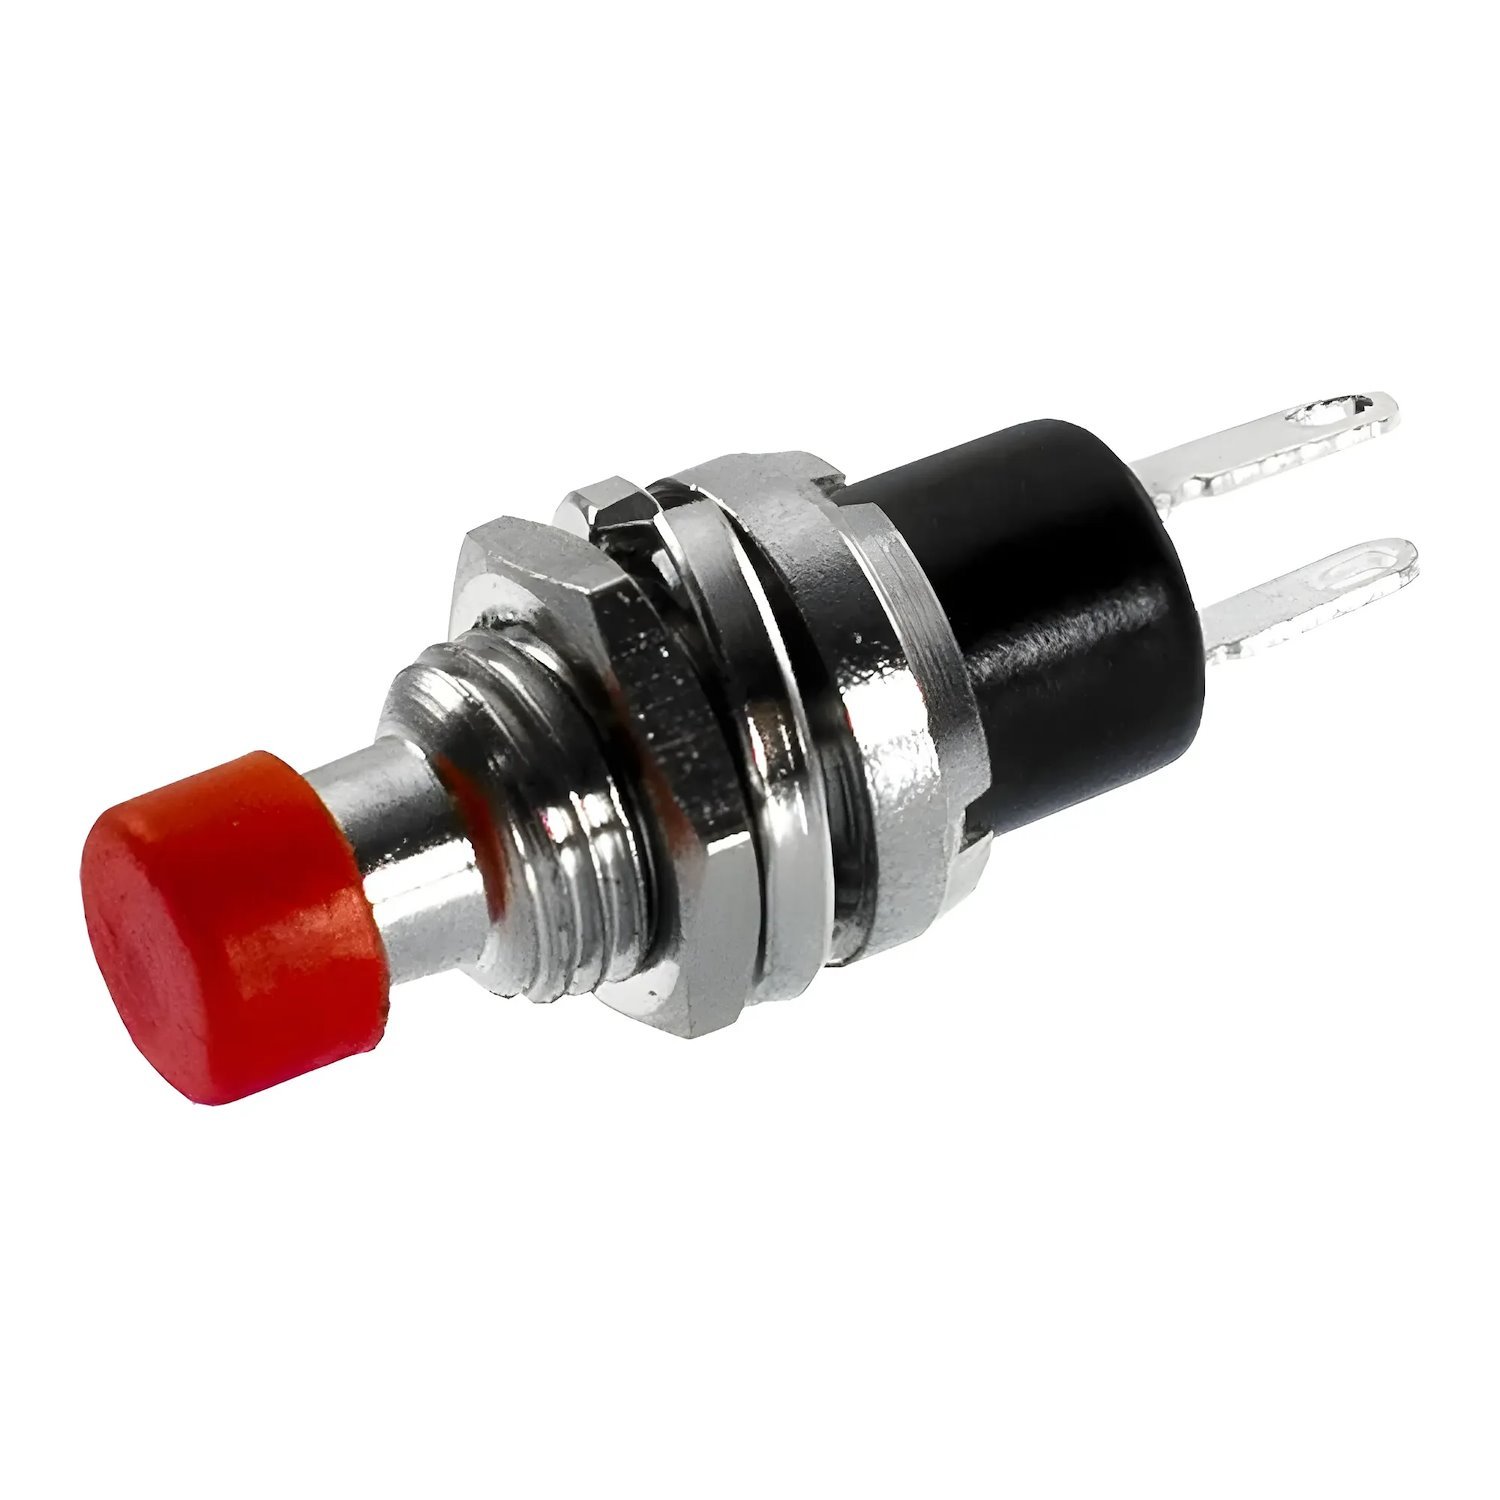 00-51029 Classic Micro Red Momentary Push Button Switch